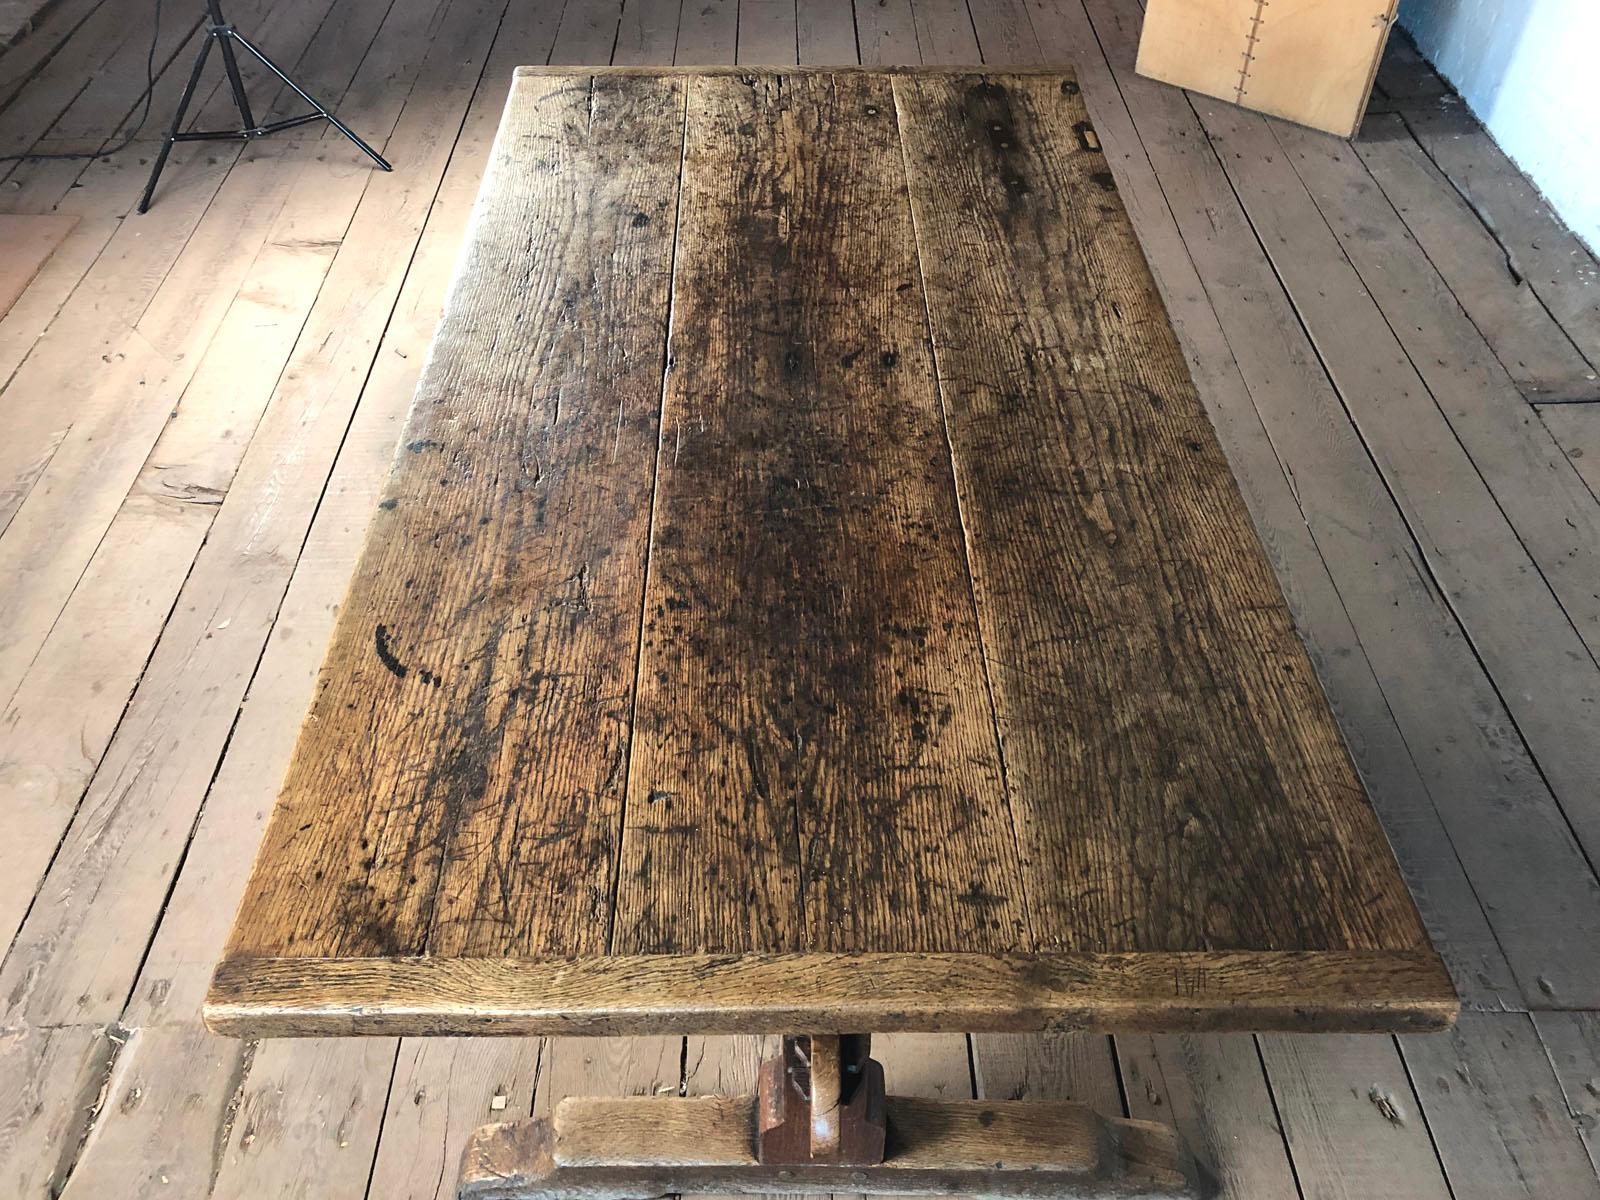 Rustic, very charming trestle table, the three plank chestnut top with narrow bread board ends supported by an oak trestle base, the uneven staining on the top created by use and age give it a unique personality.
The table is versatile, perfect for